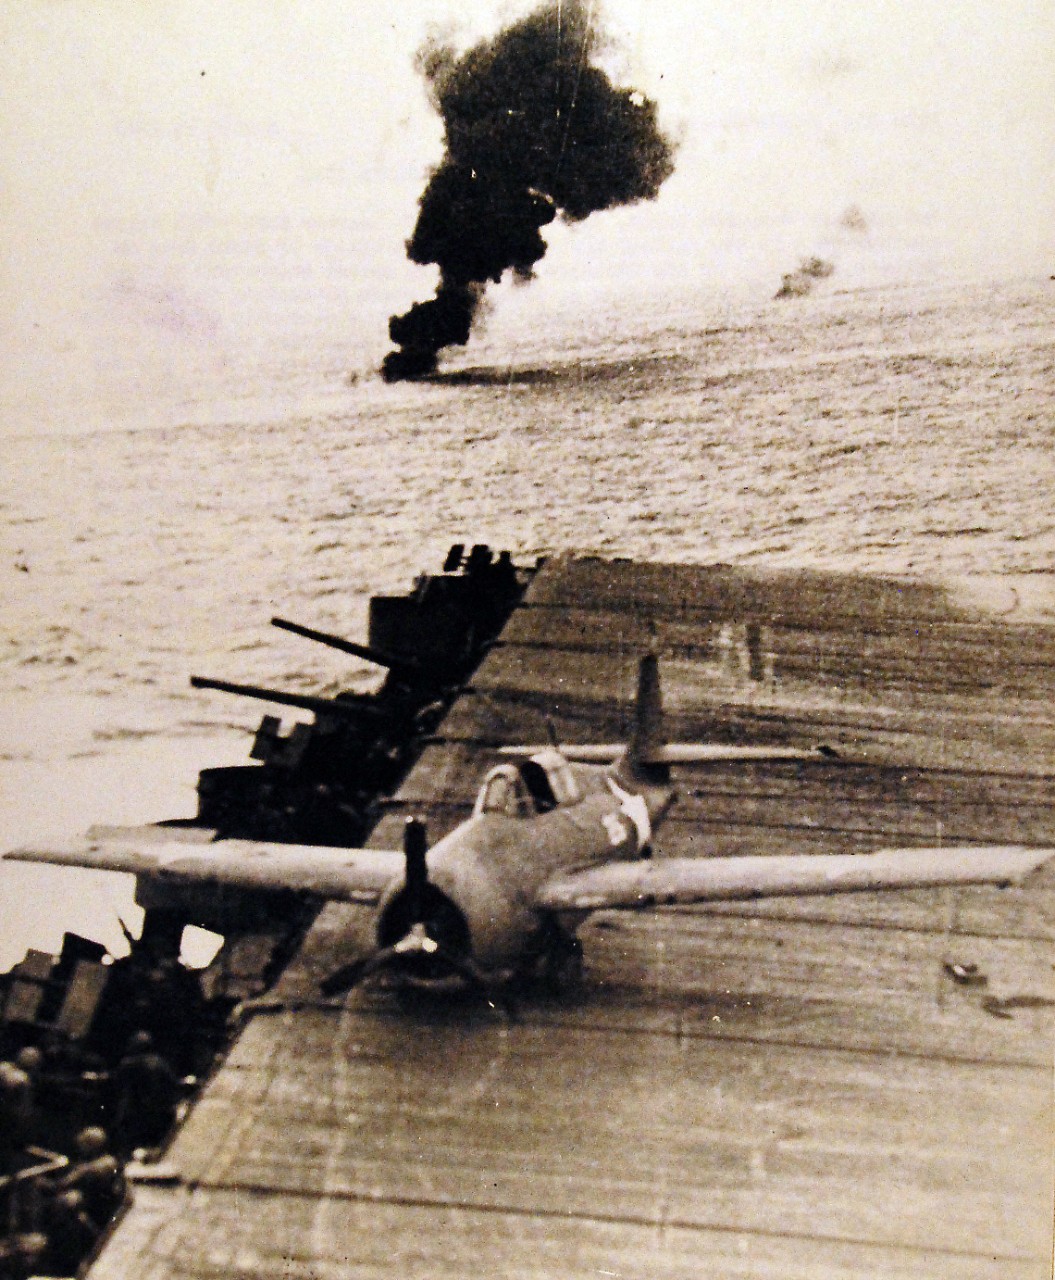 80-G-42560:   Battle of Santa Cruz Islands,  26 October 1942.    Scene from the flight deck of USS Enterprise (CV 6).  Shaken loose from its moorings by the powerful explosion of a Japanese bomb which hit in the water near Enterprise, this U.S. plane skitters to the edge of the carrier’s flight deck.  Note, the column of smoke sent up by a downed Japanese plane in the background.   Photographed October 26, 1942.  Official U.S. Navy photograph, now in the collections of the National Archives.  (2016/05/17).